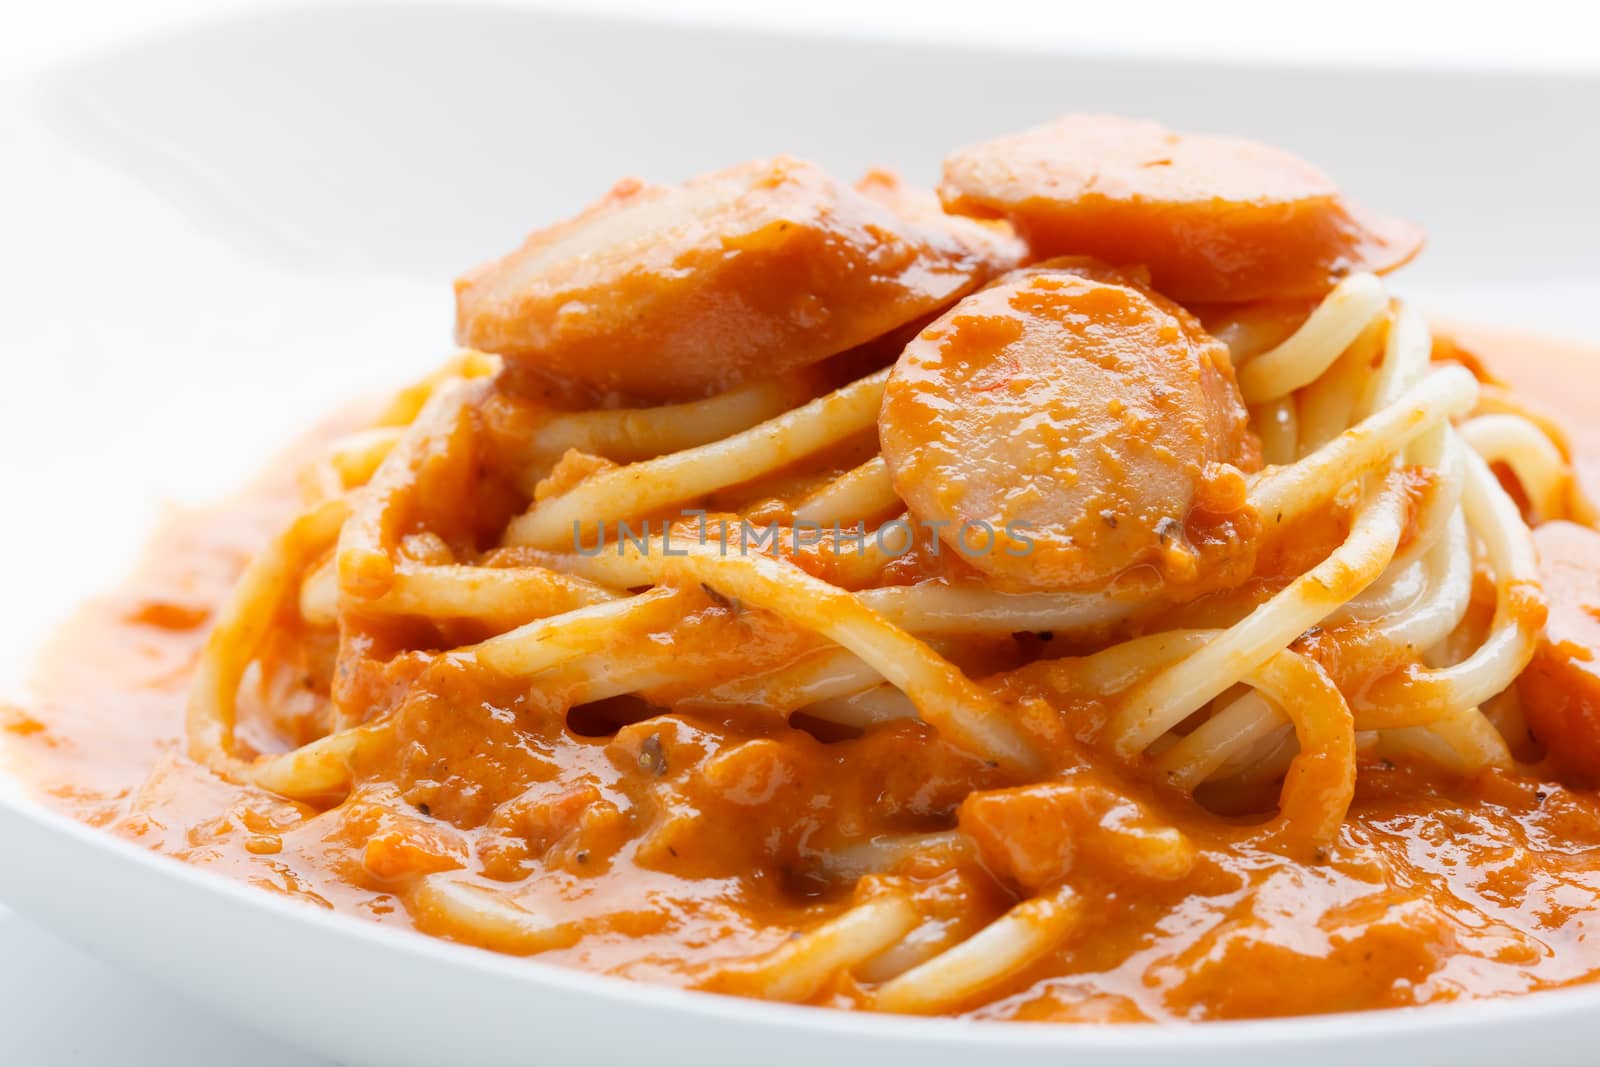 Spaghetti with sausage and tomato sauce by vitawin